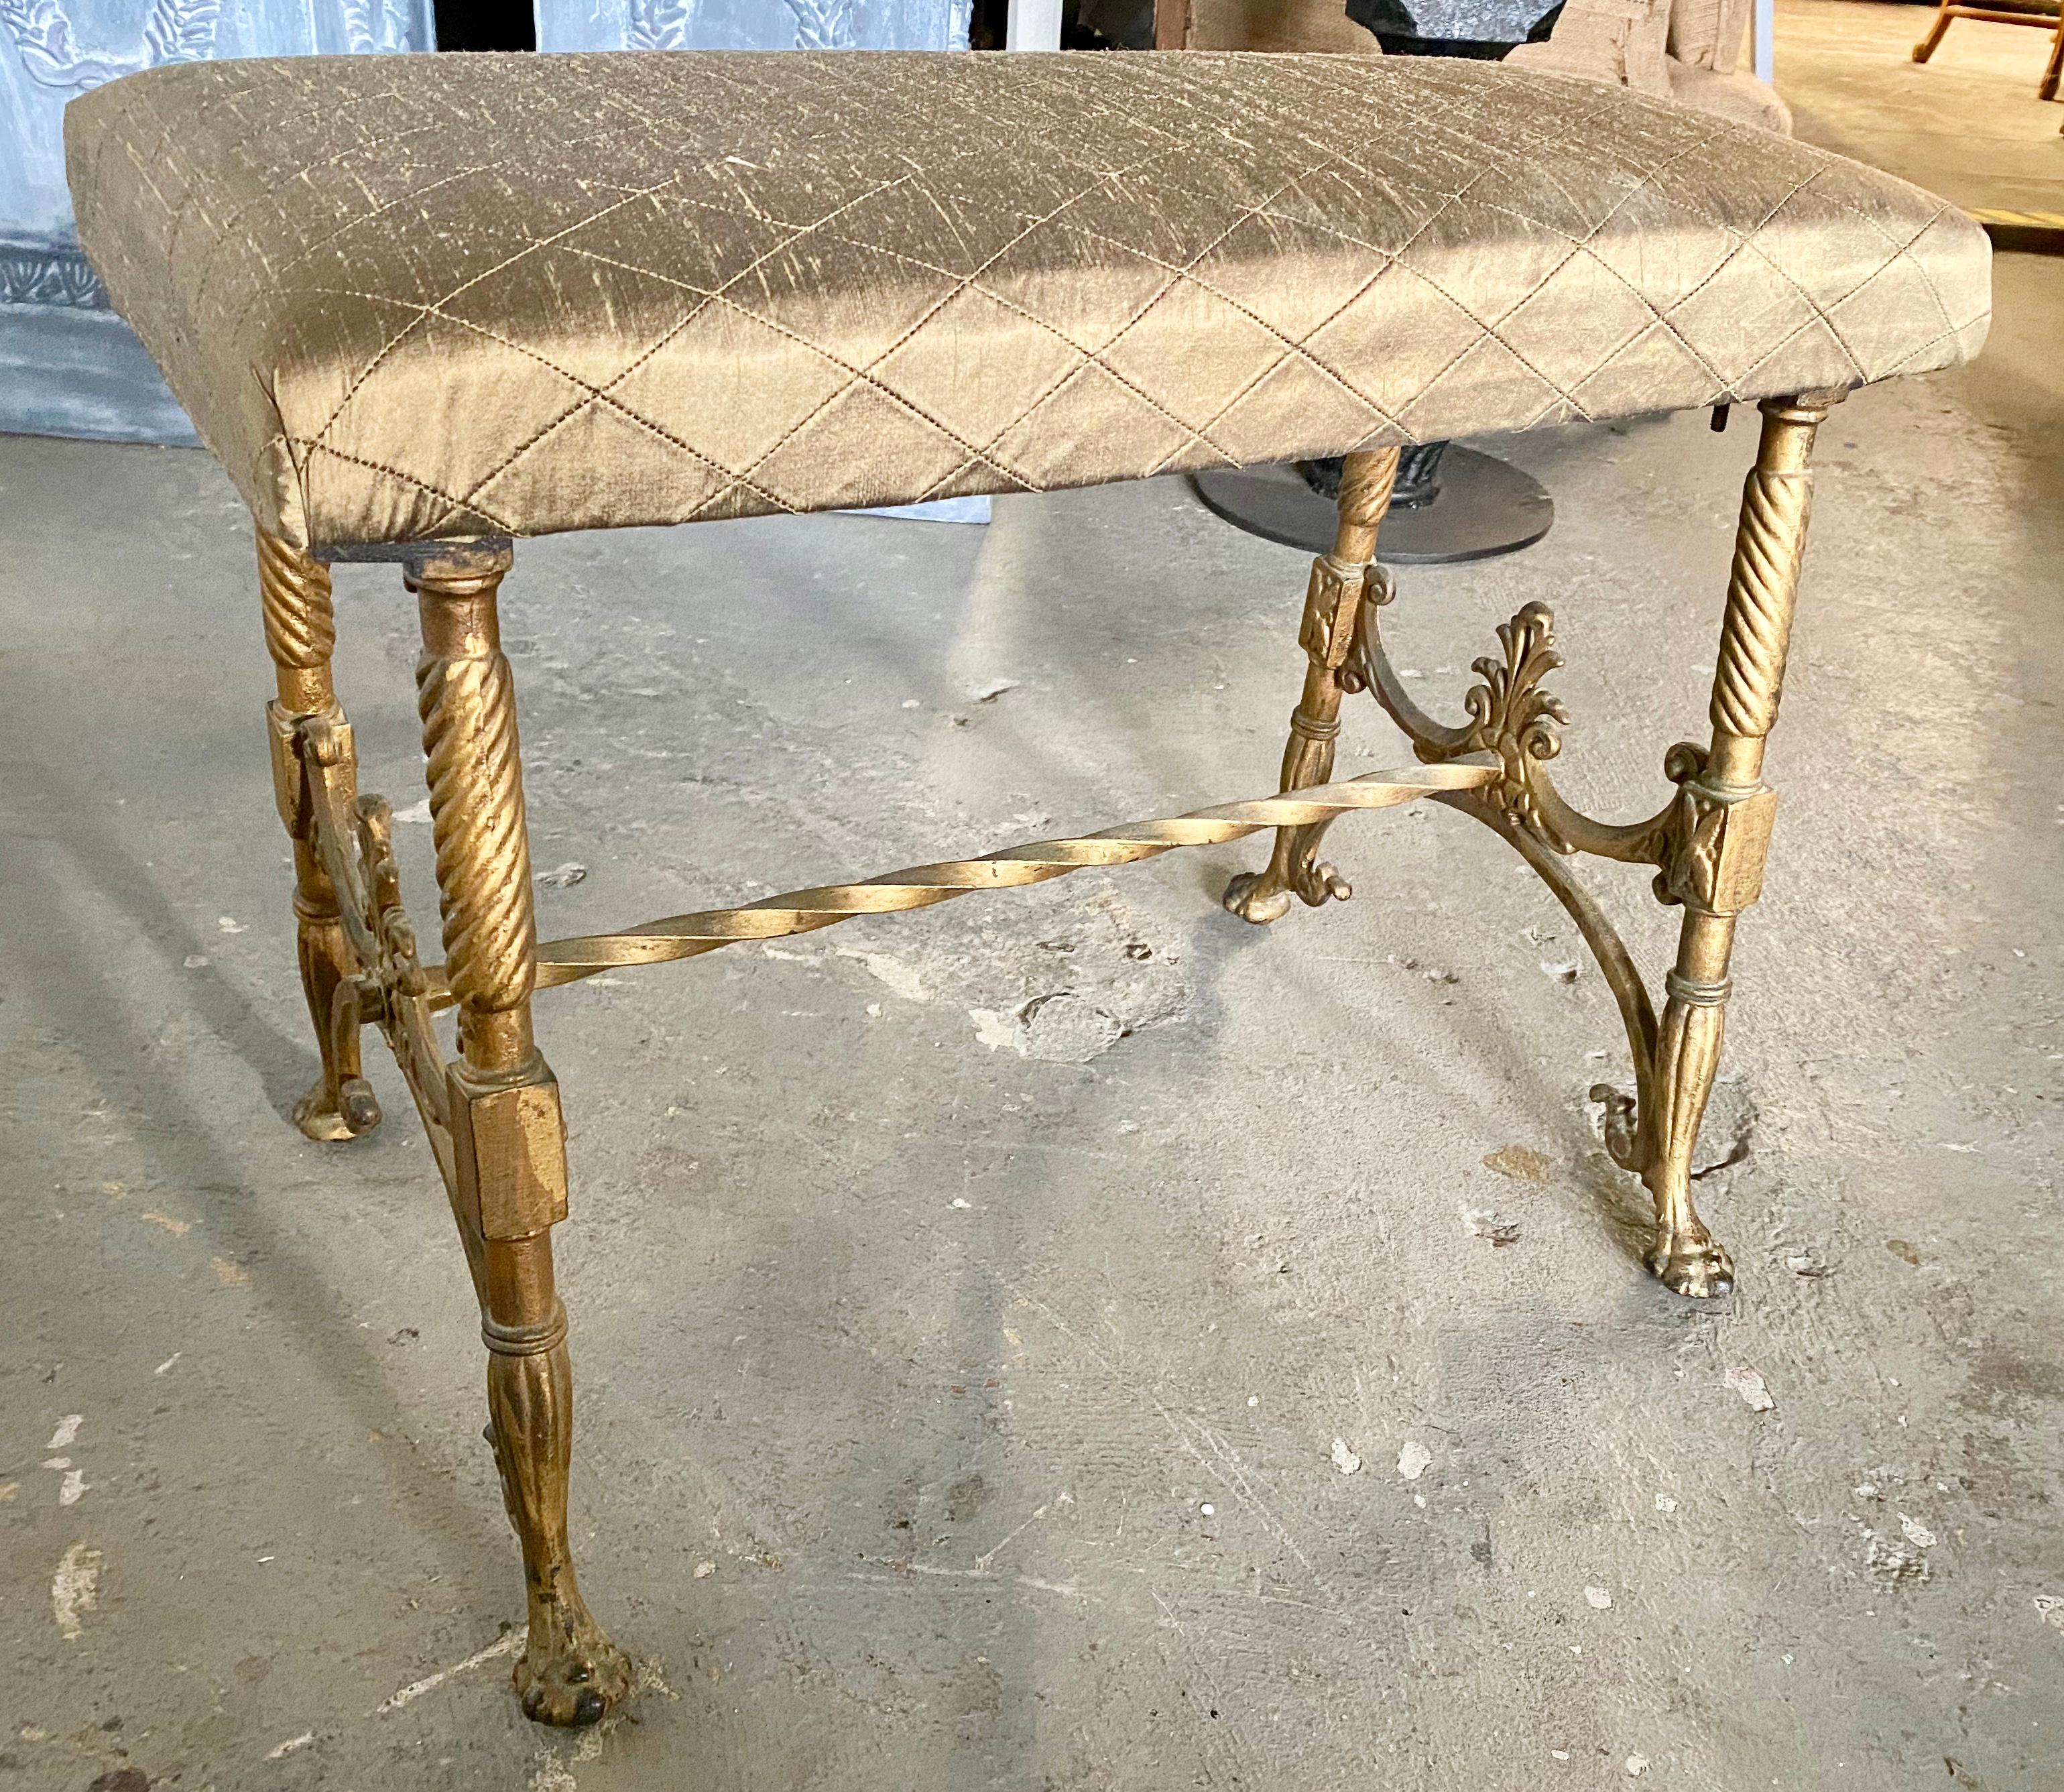 Antique Victorian period gold gilt cast iron metal bench. Seat is newly recovered in diamond pattern upholstery. Will make a wonderful extra seat in the boudoir or dressing room. 
Footstools
Ottomans and poufs
Stools
Hollywood Regency.

   